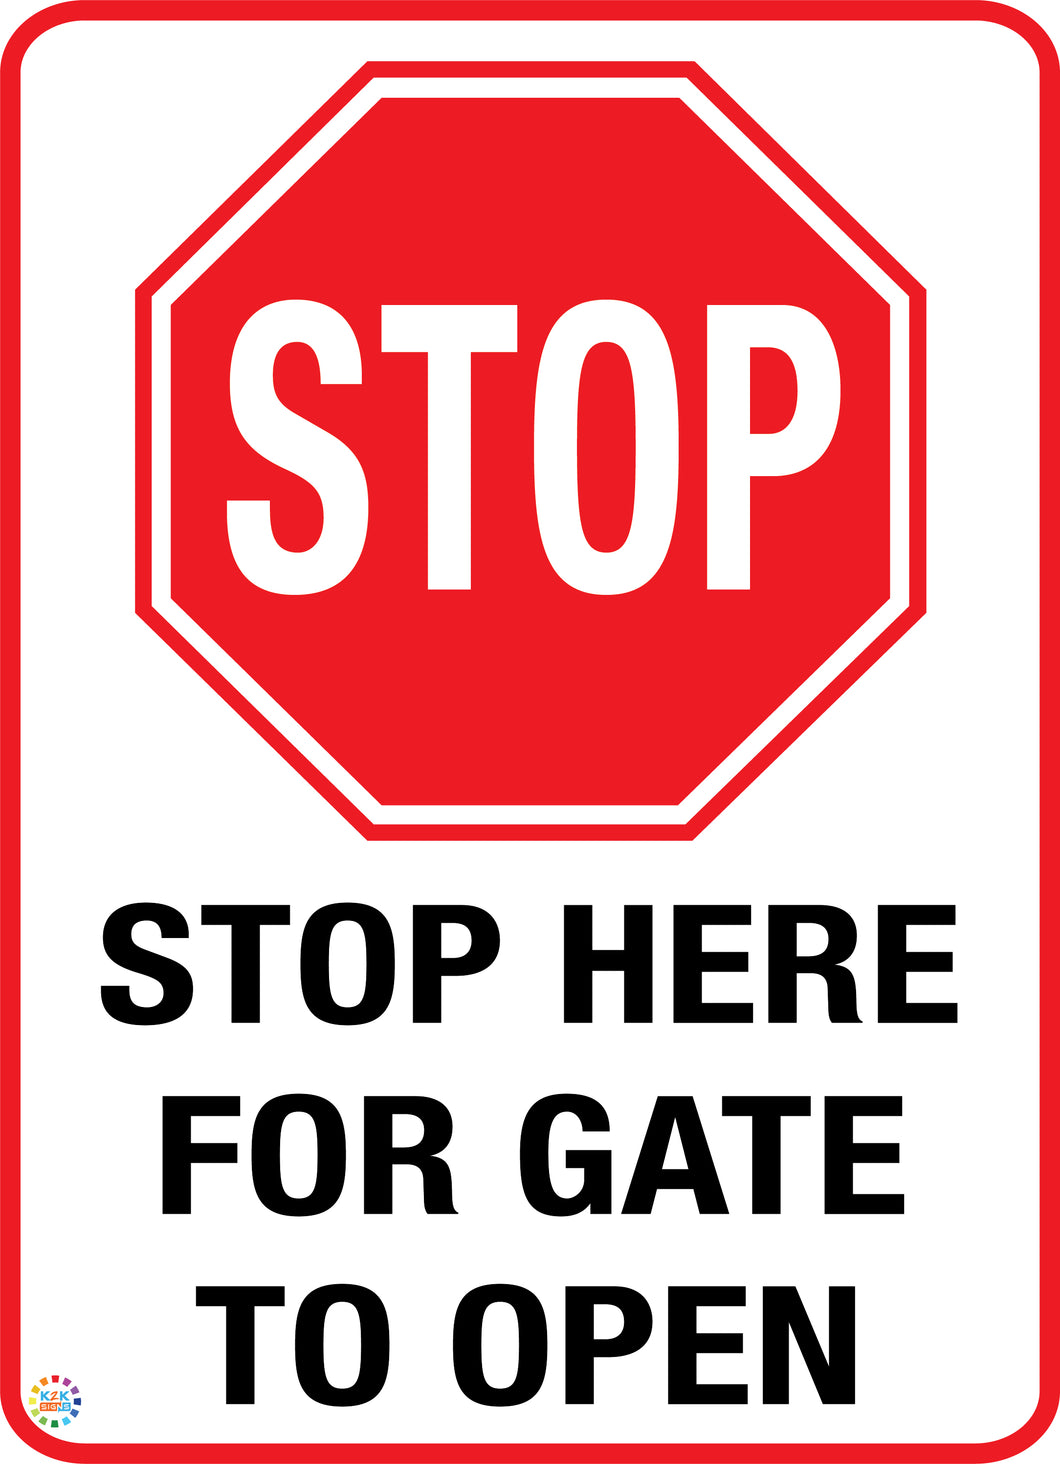 Stop - Here For Gate To Open